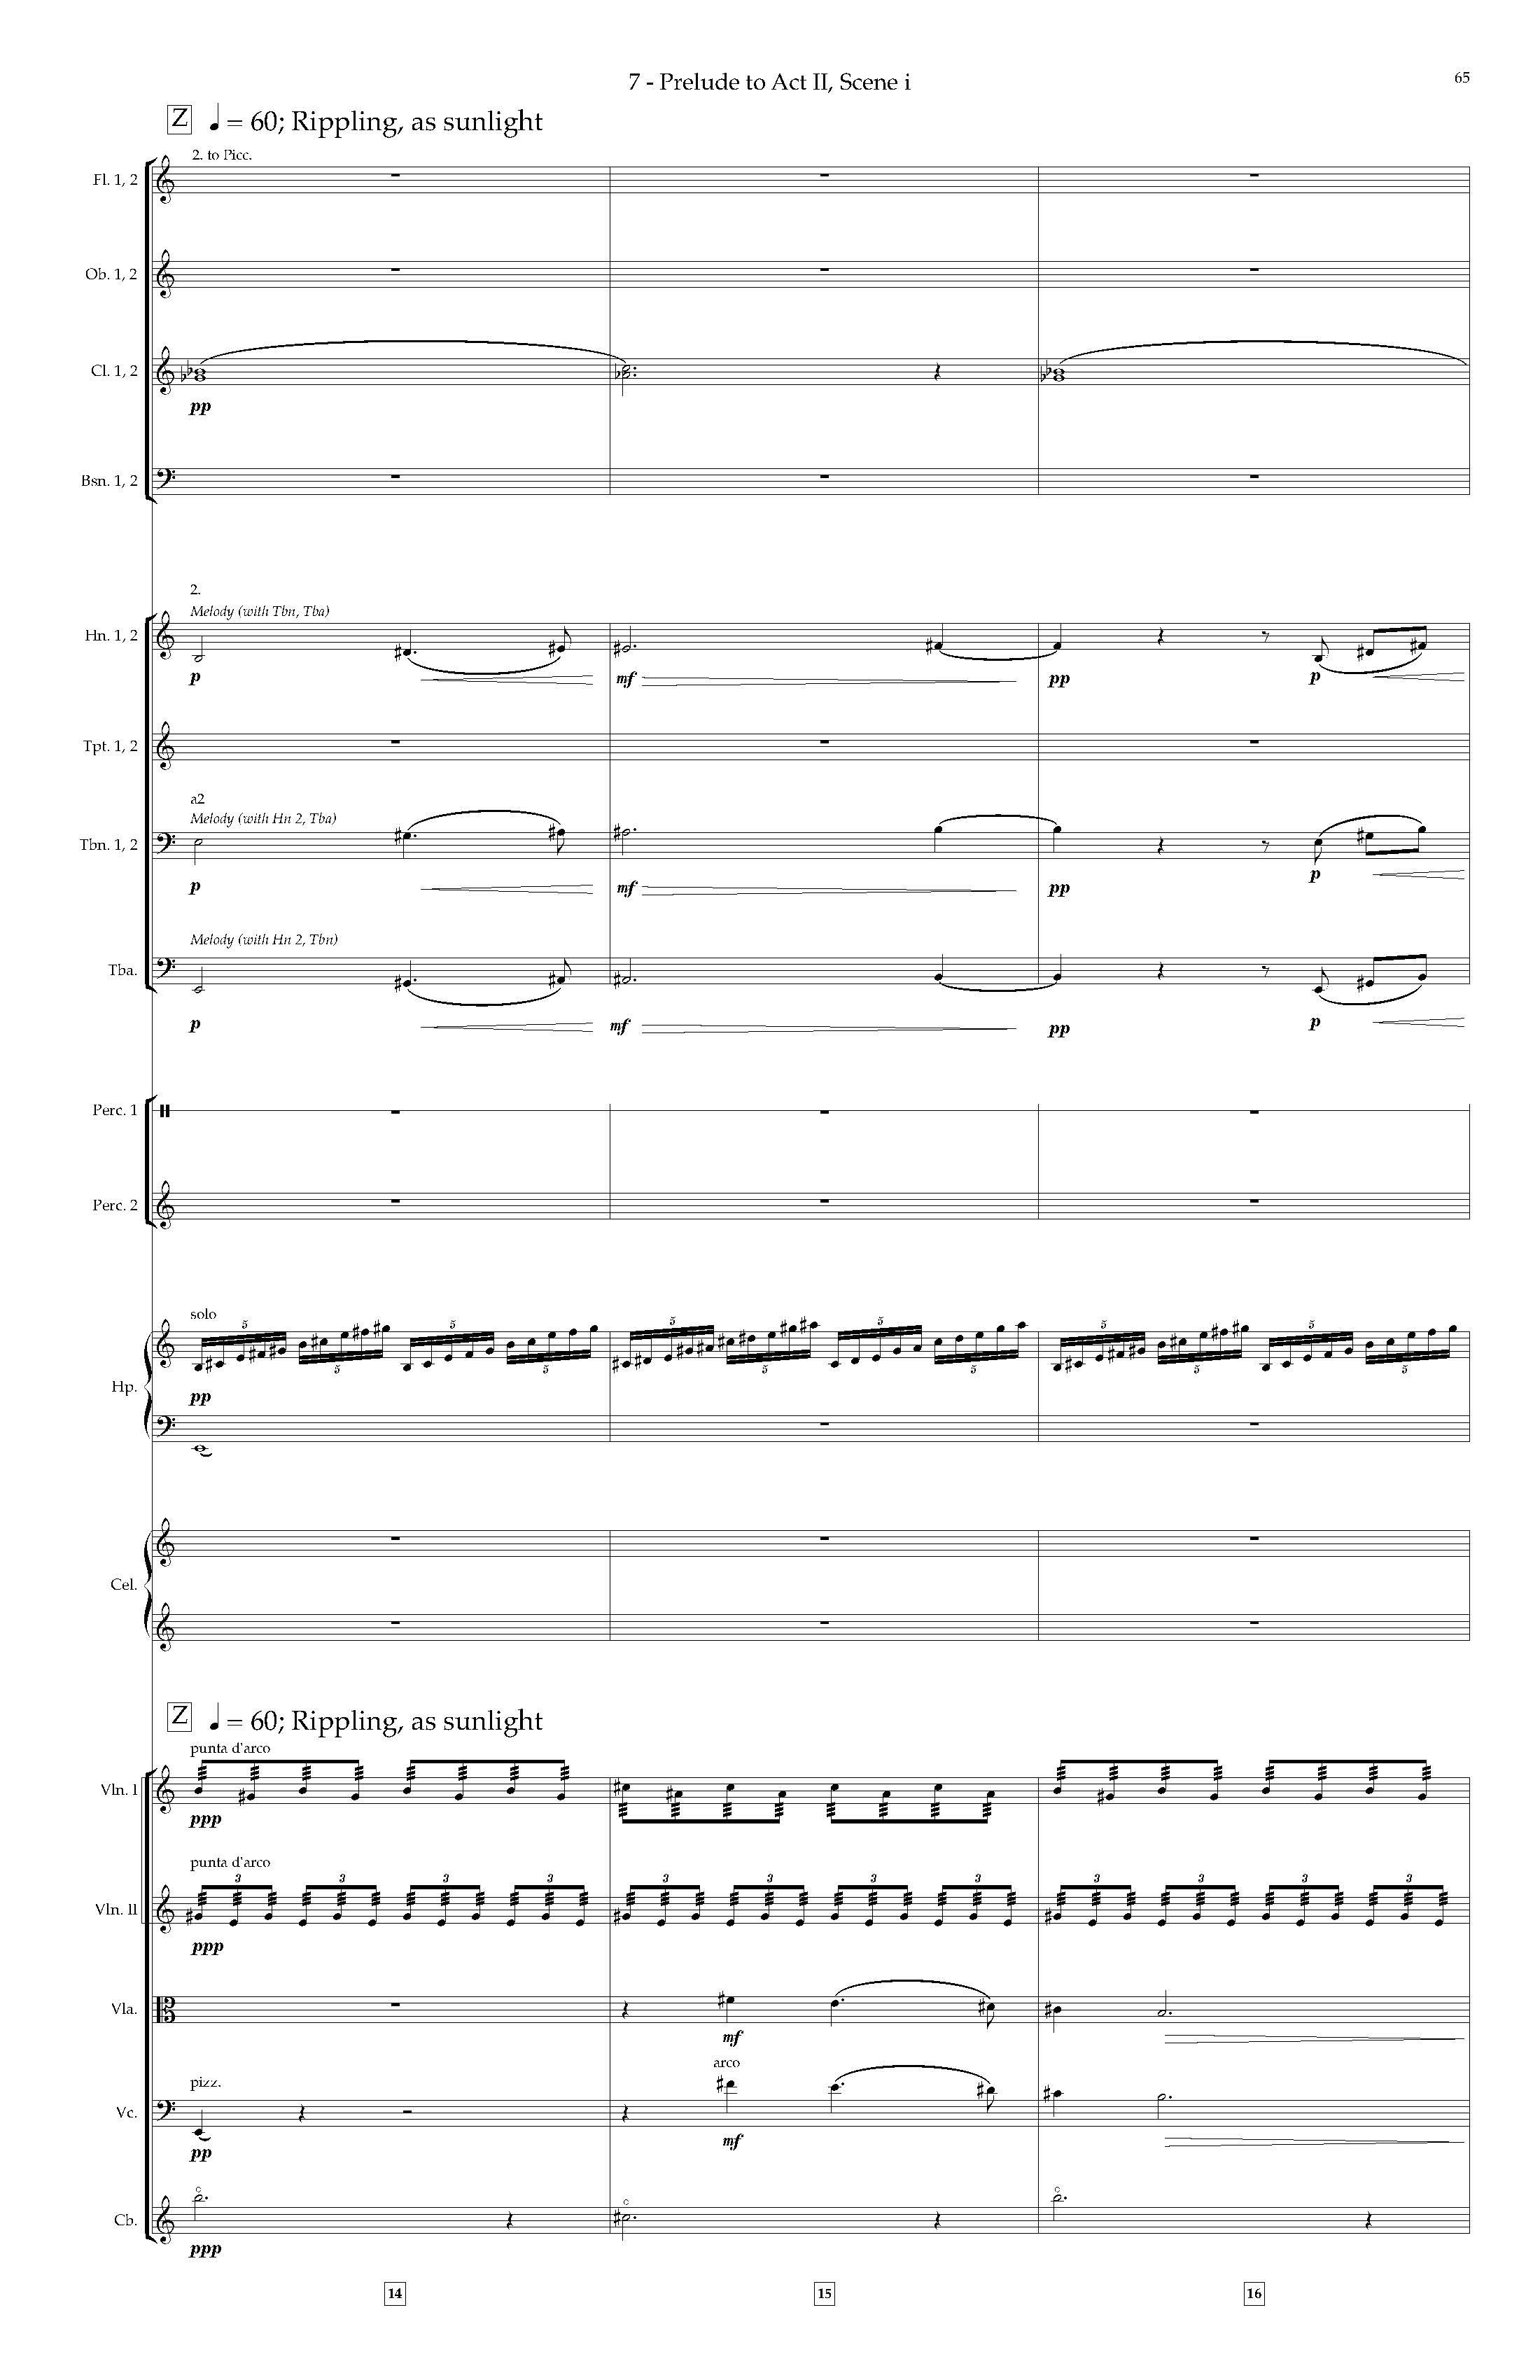 Arias and Interludes from HWGS - Complete Score_Page_71.jpg